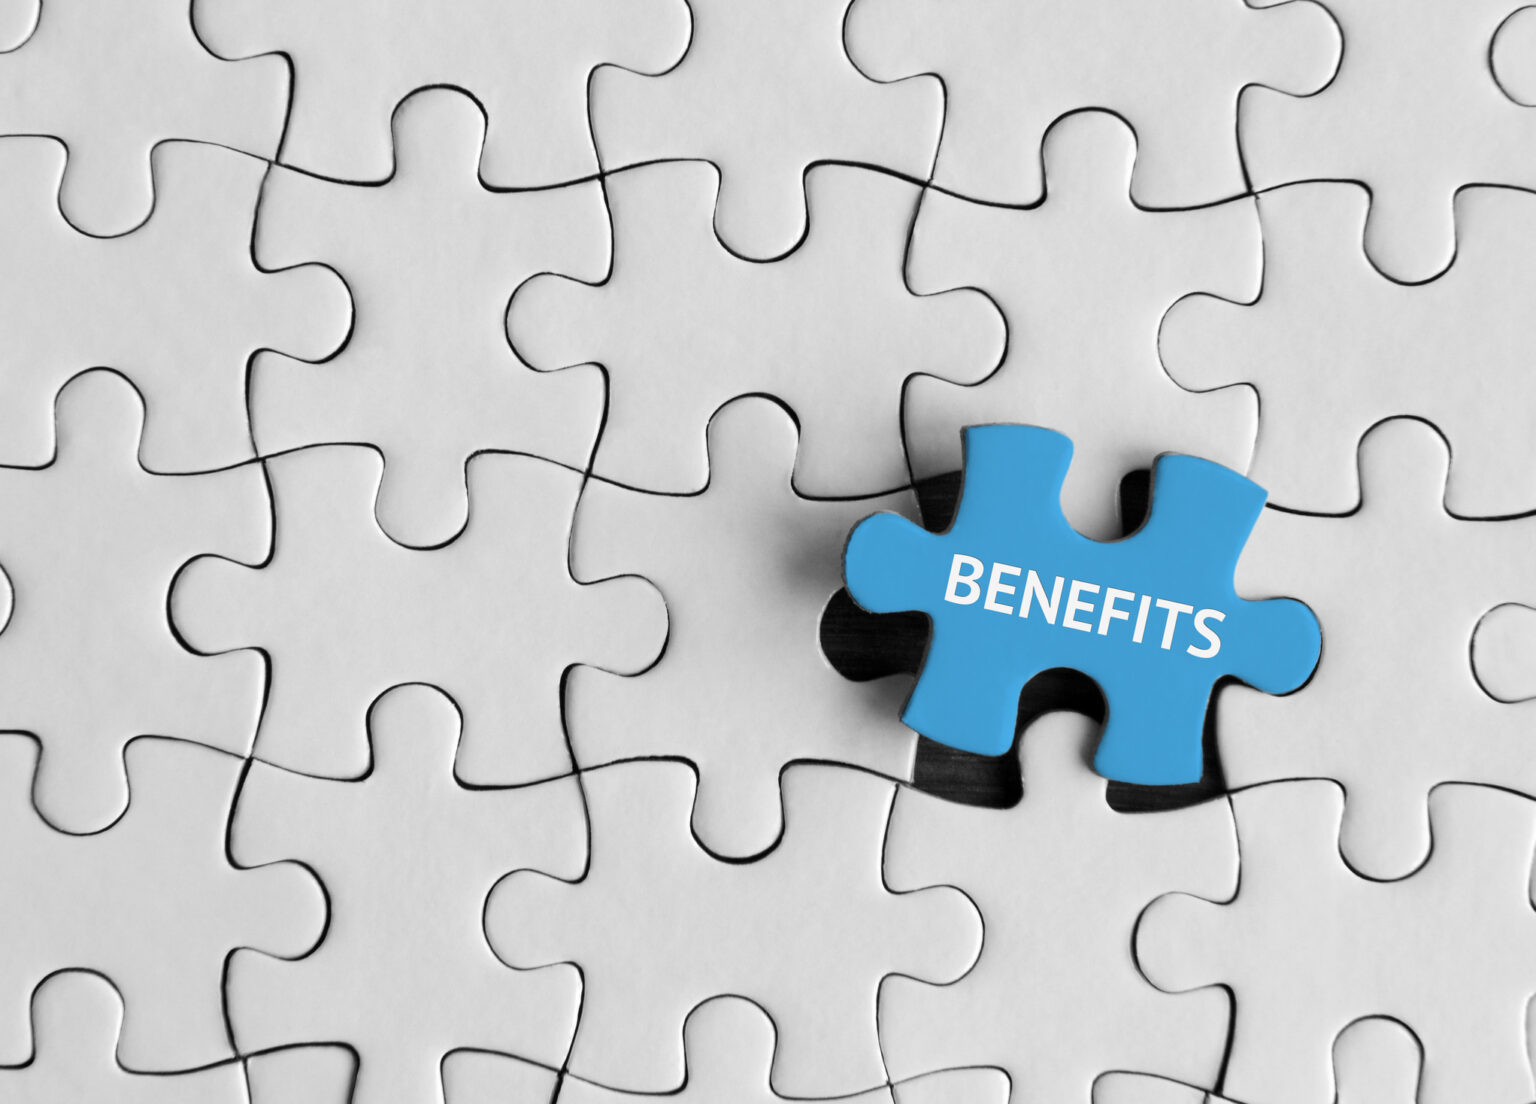 Image of puzzle piece with word "benefits" on it